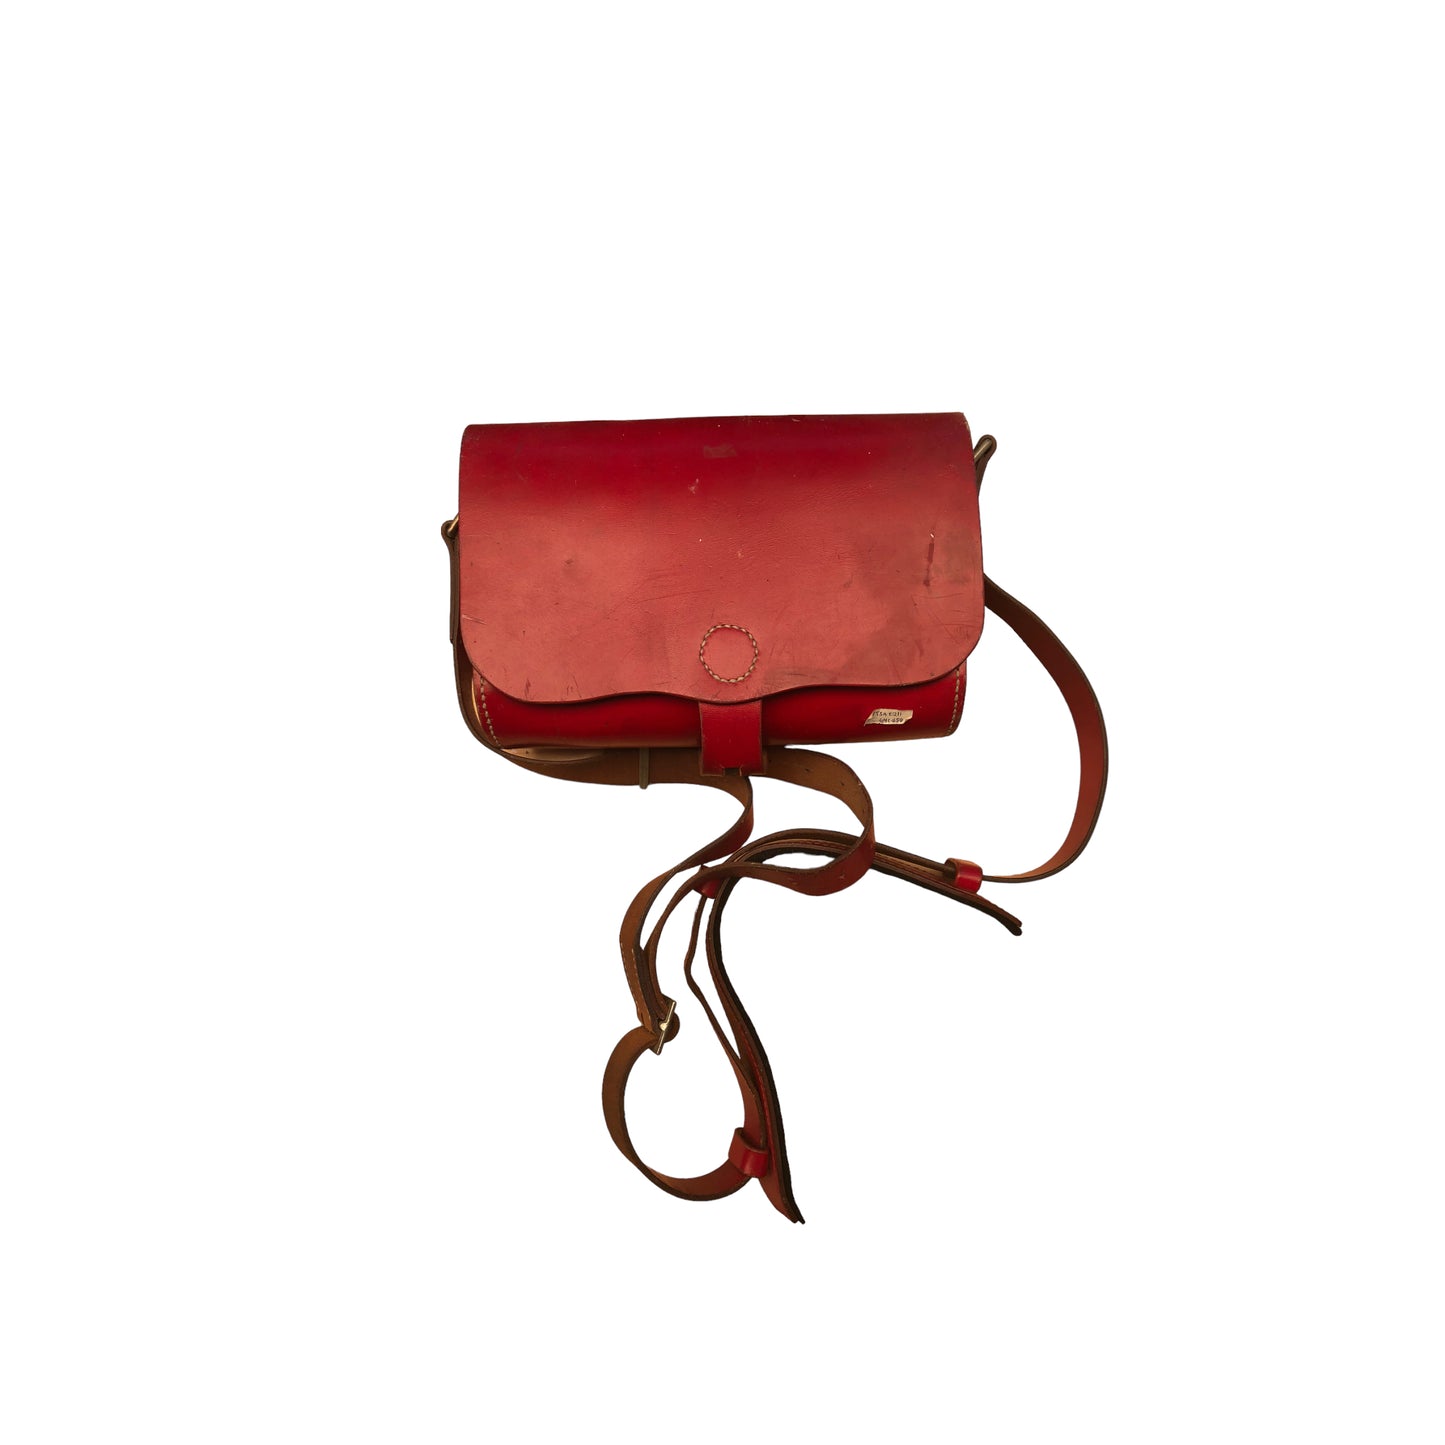 1980s Vintage Candy Red Aldo Leather and Suede Bag